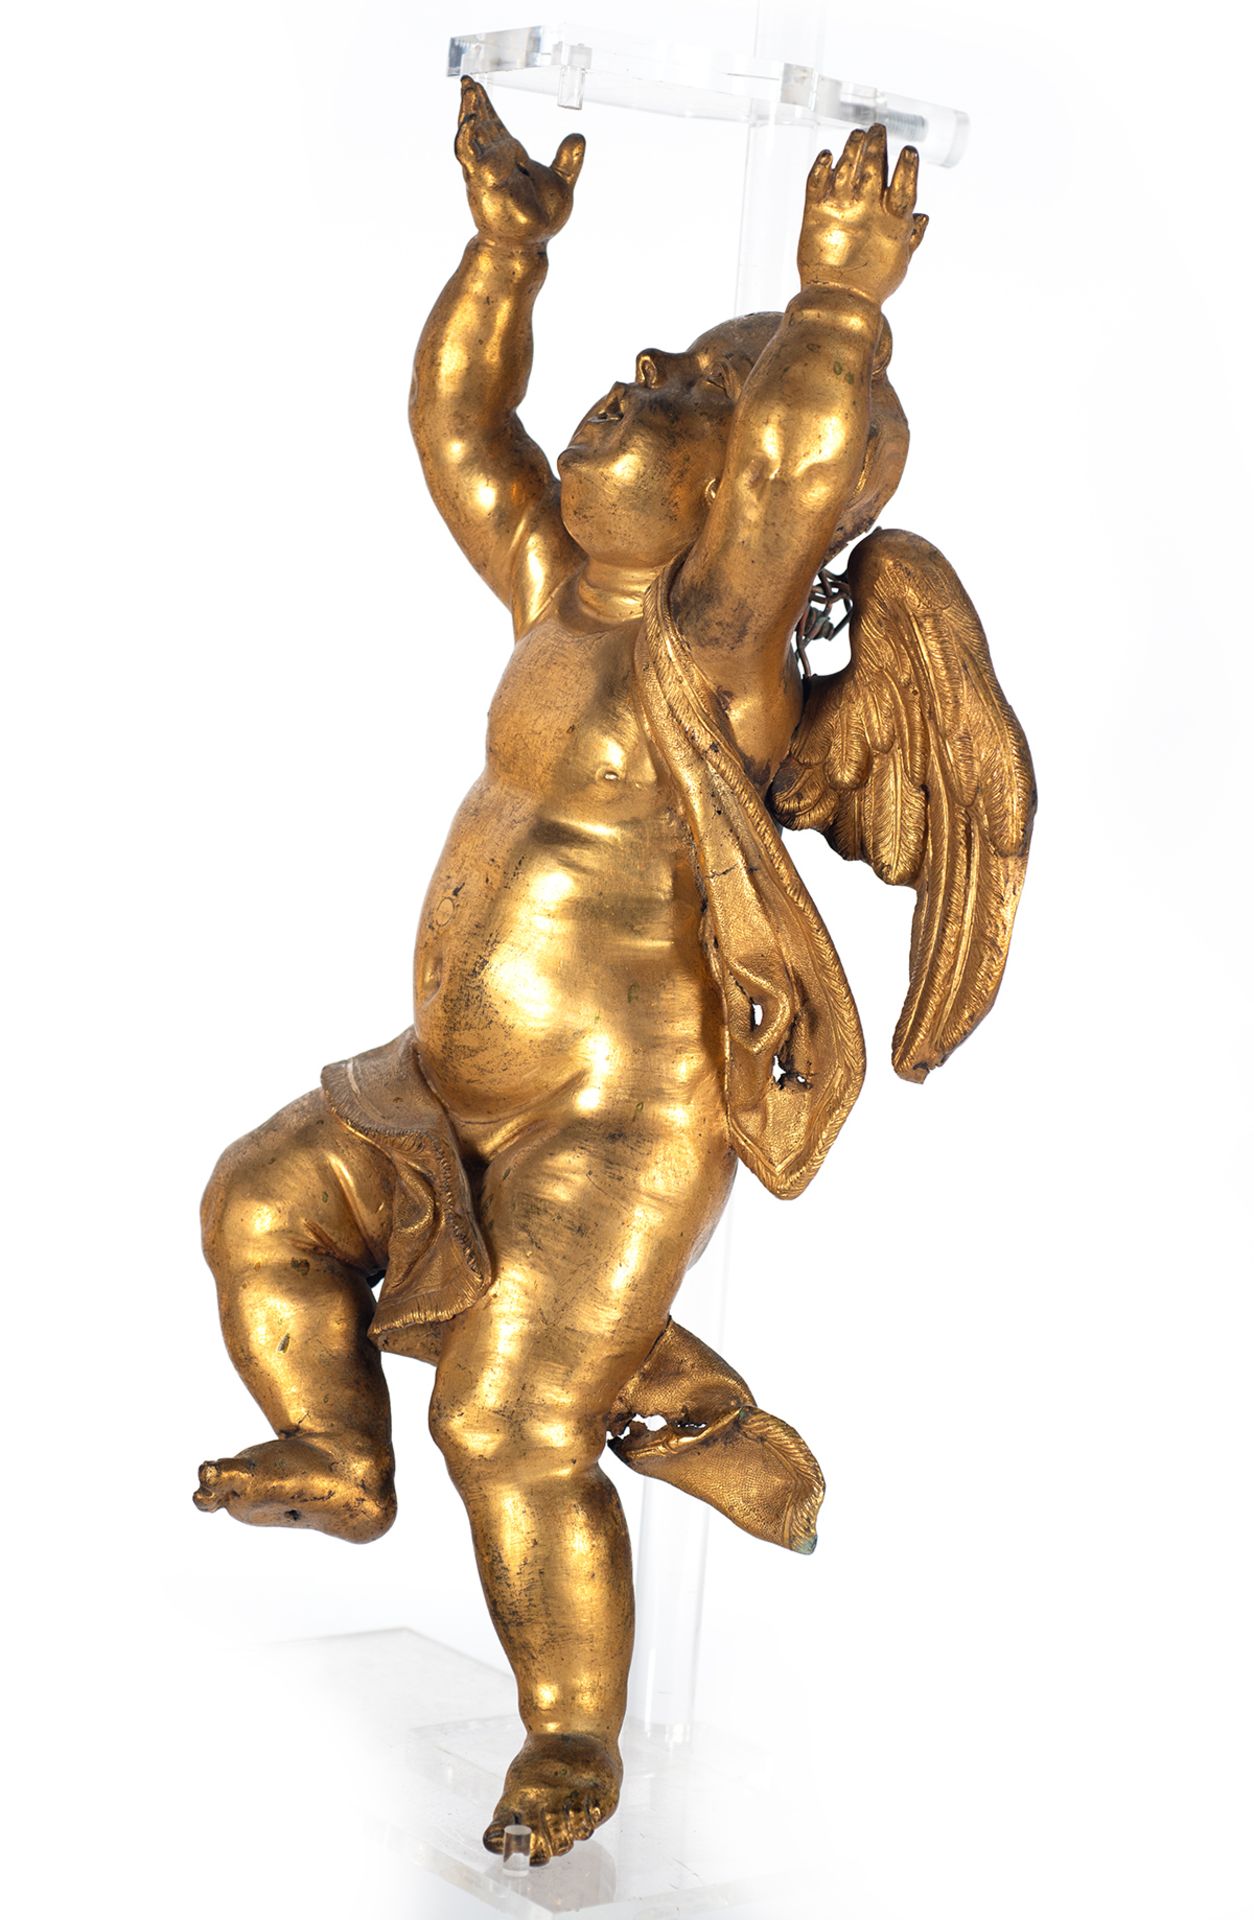 Exceptional pair of angels in gilded bronze, 16th-17th century - Image 7 of 11